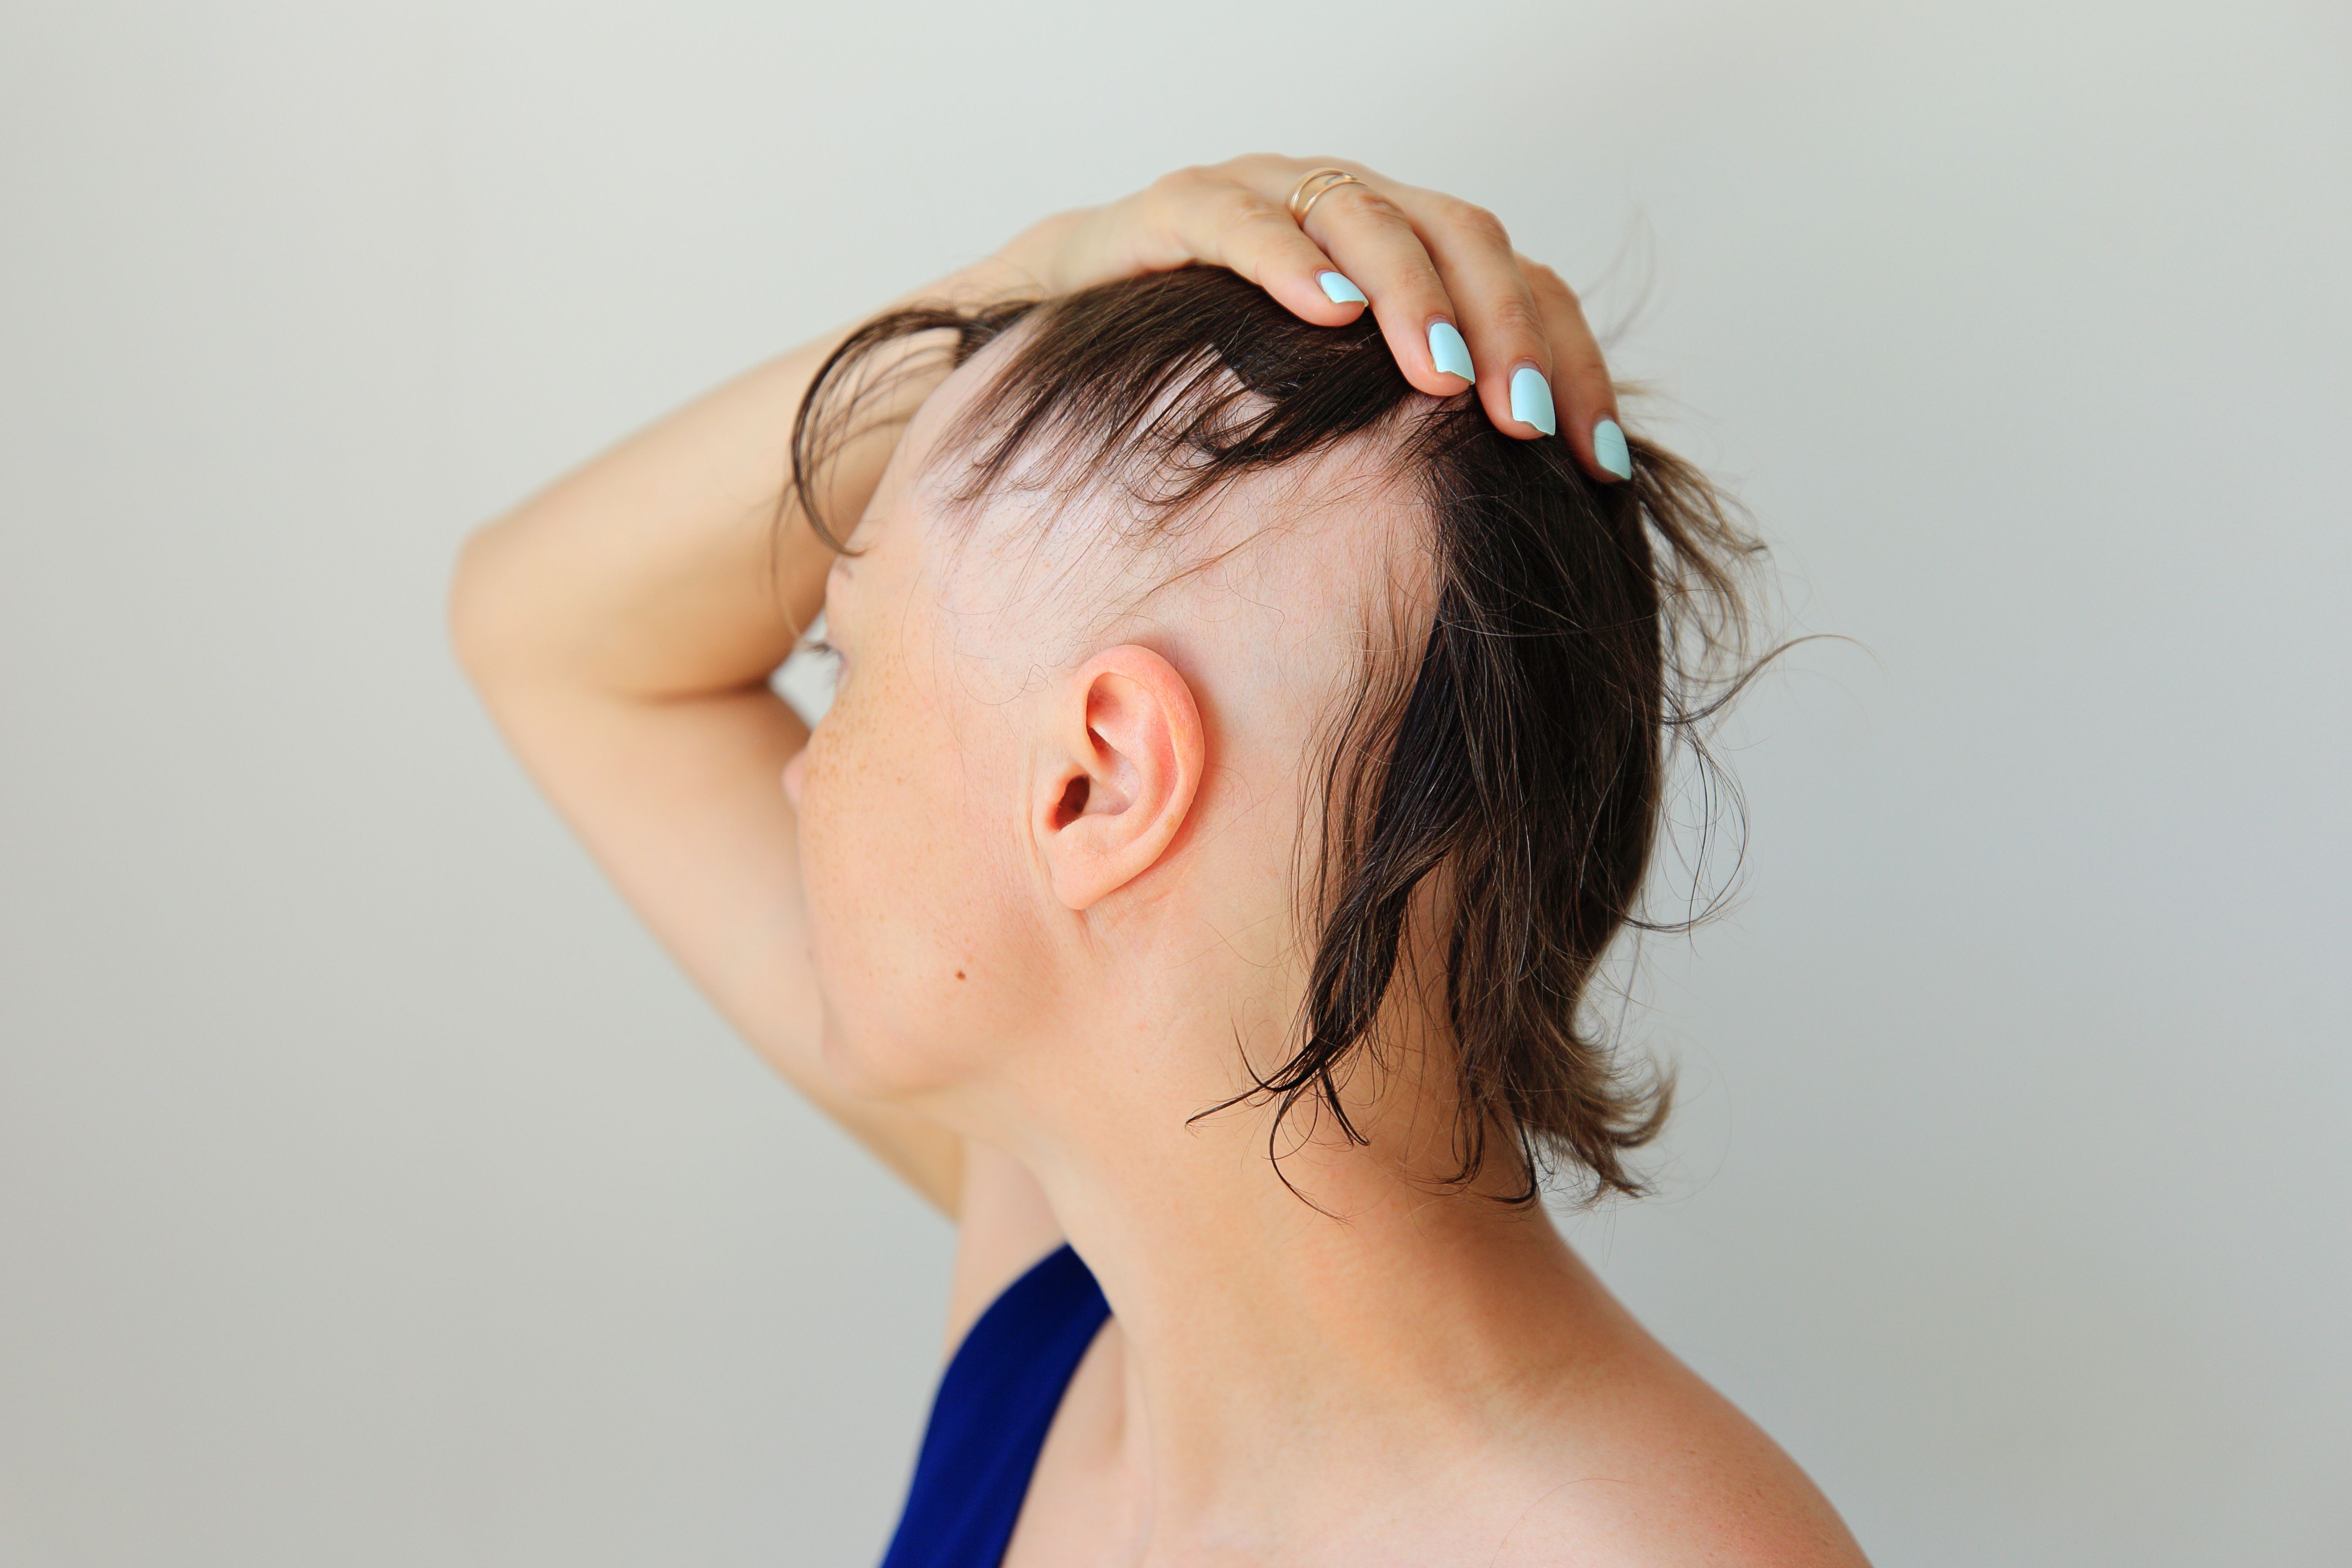 An Updated in the Management of Alopecia Areata | IntechOpen